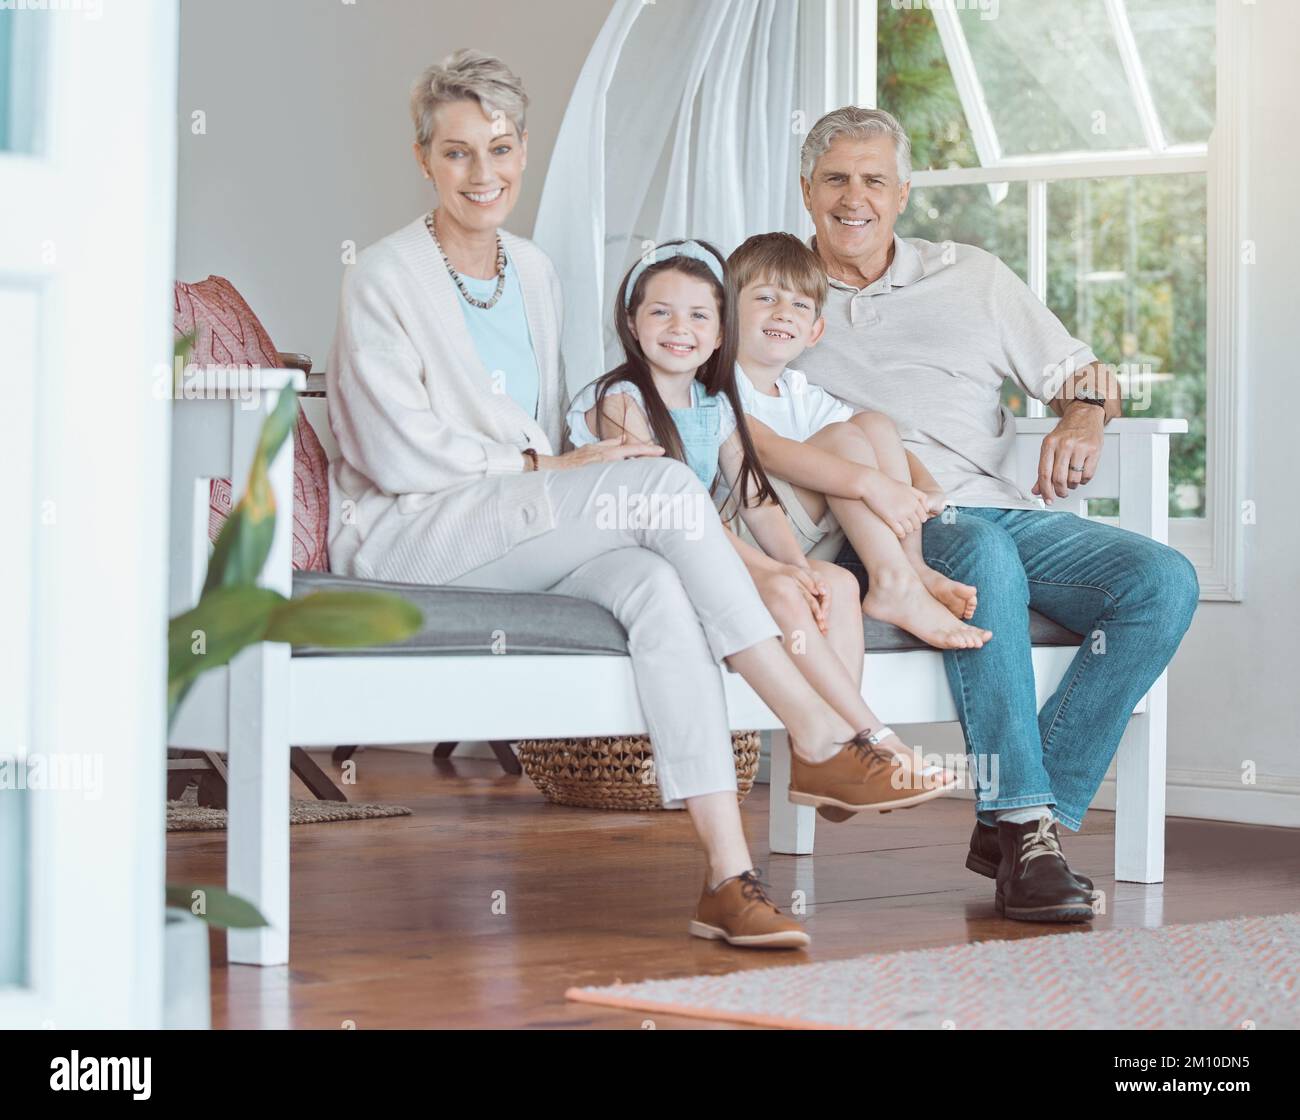 Cherished time with those closest to us. grandparents bonding with their grandkids on the sofa at home. Stock Photo